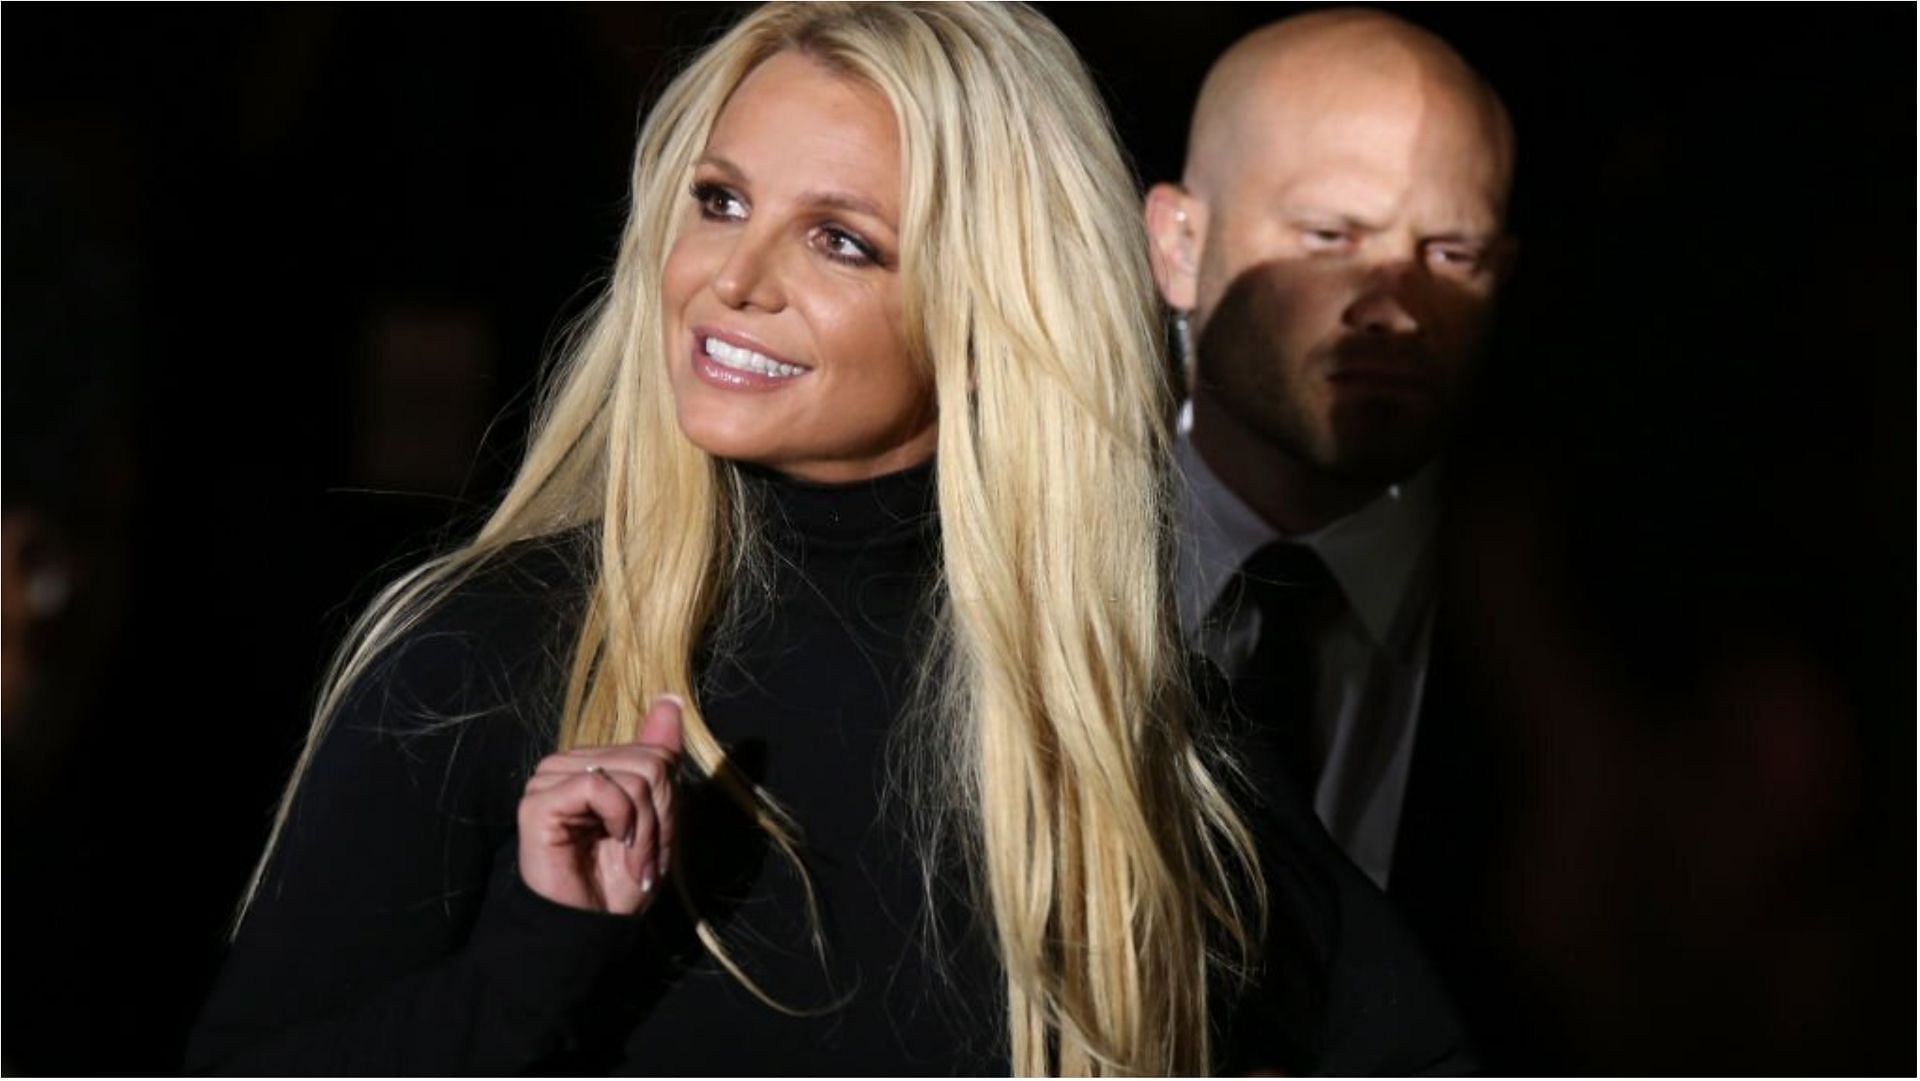 Britney Spears posted a birthday tribute for her sister which confused her fans (Image via Gabe Ginsberg/Getty Images)